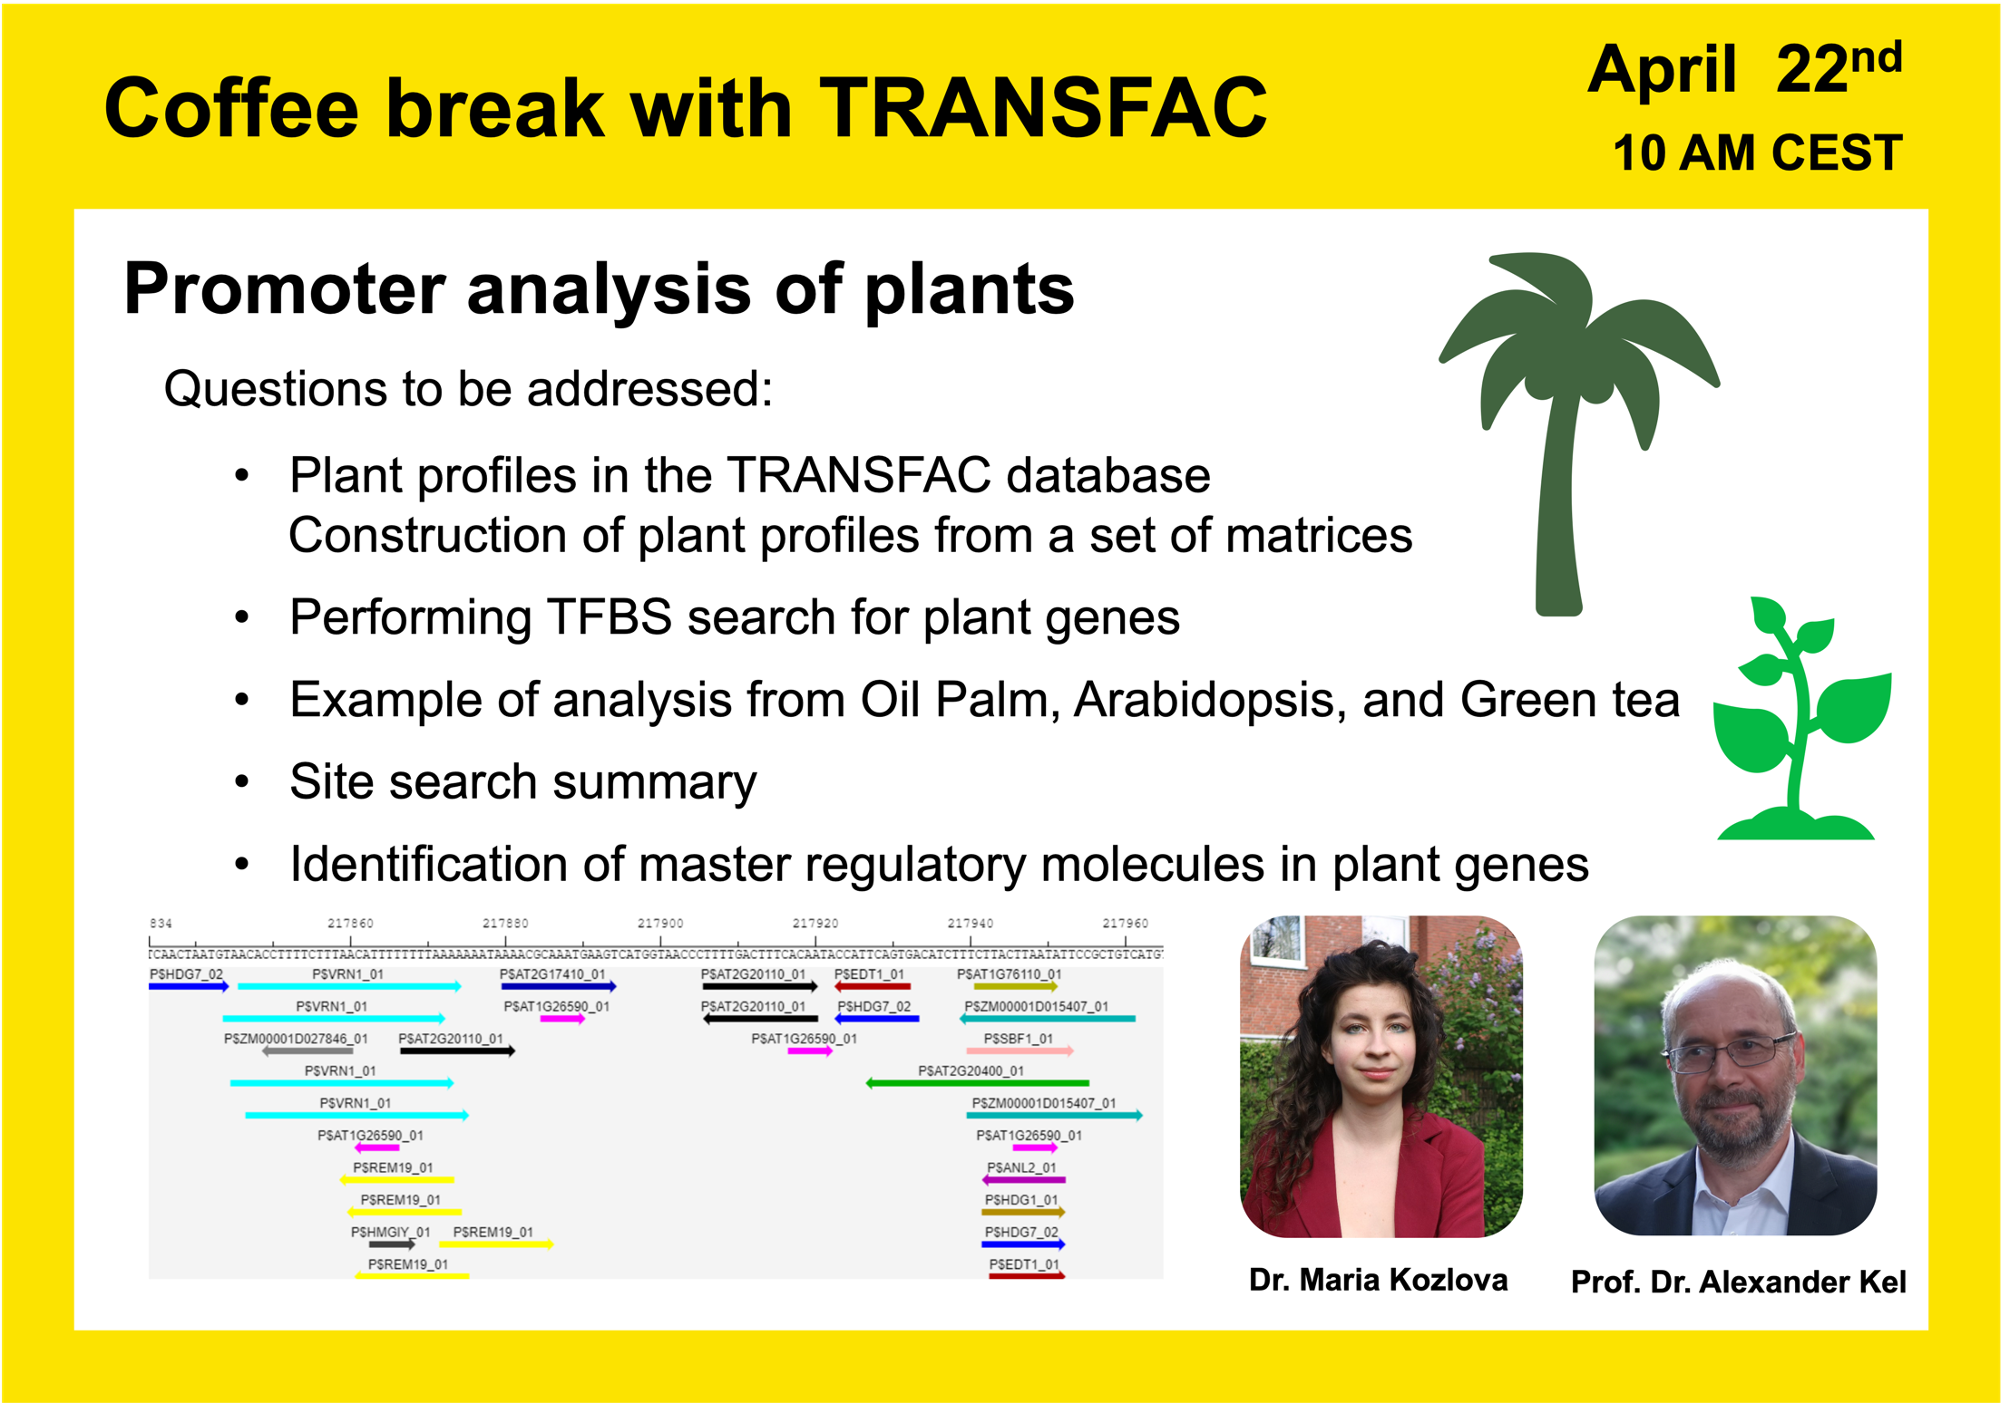 Promoter analysis of plants